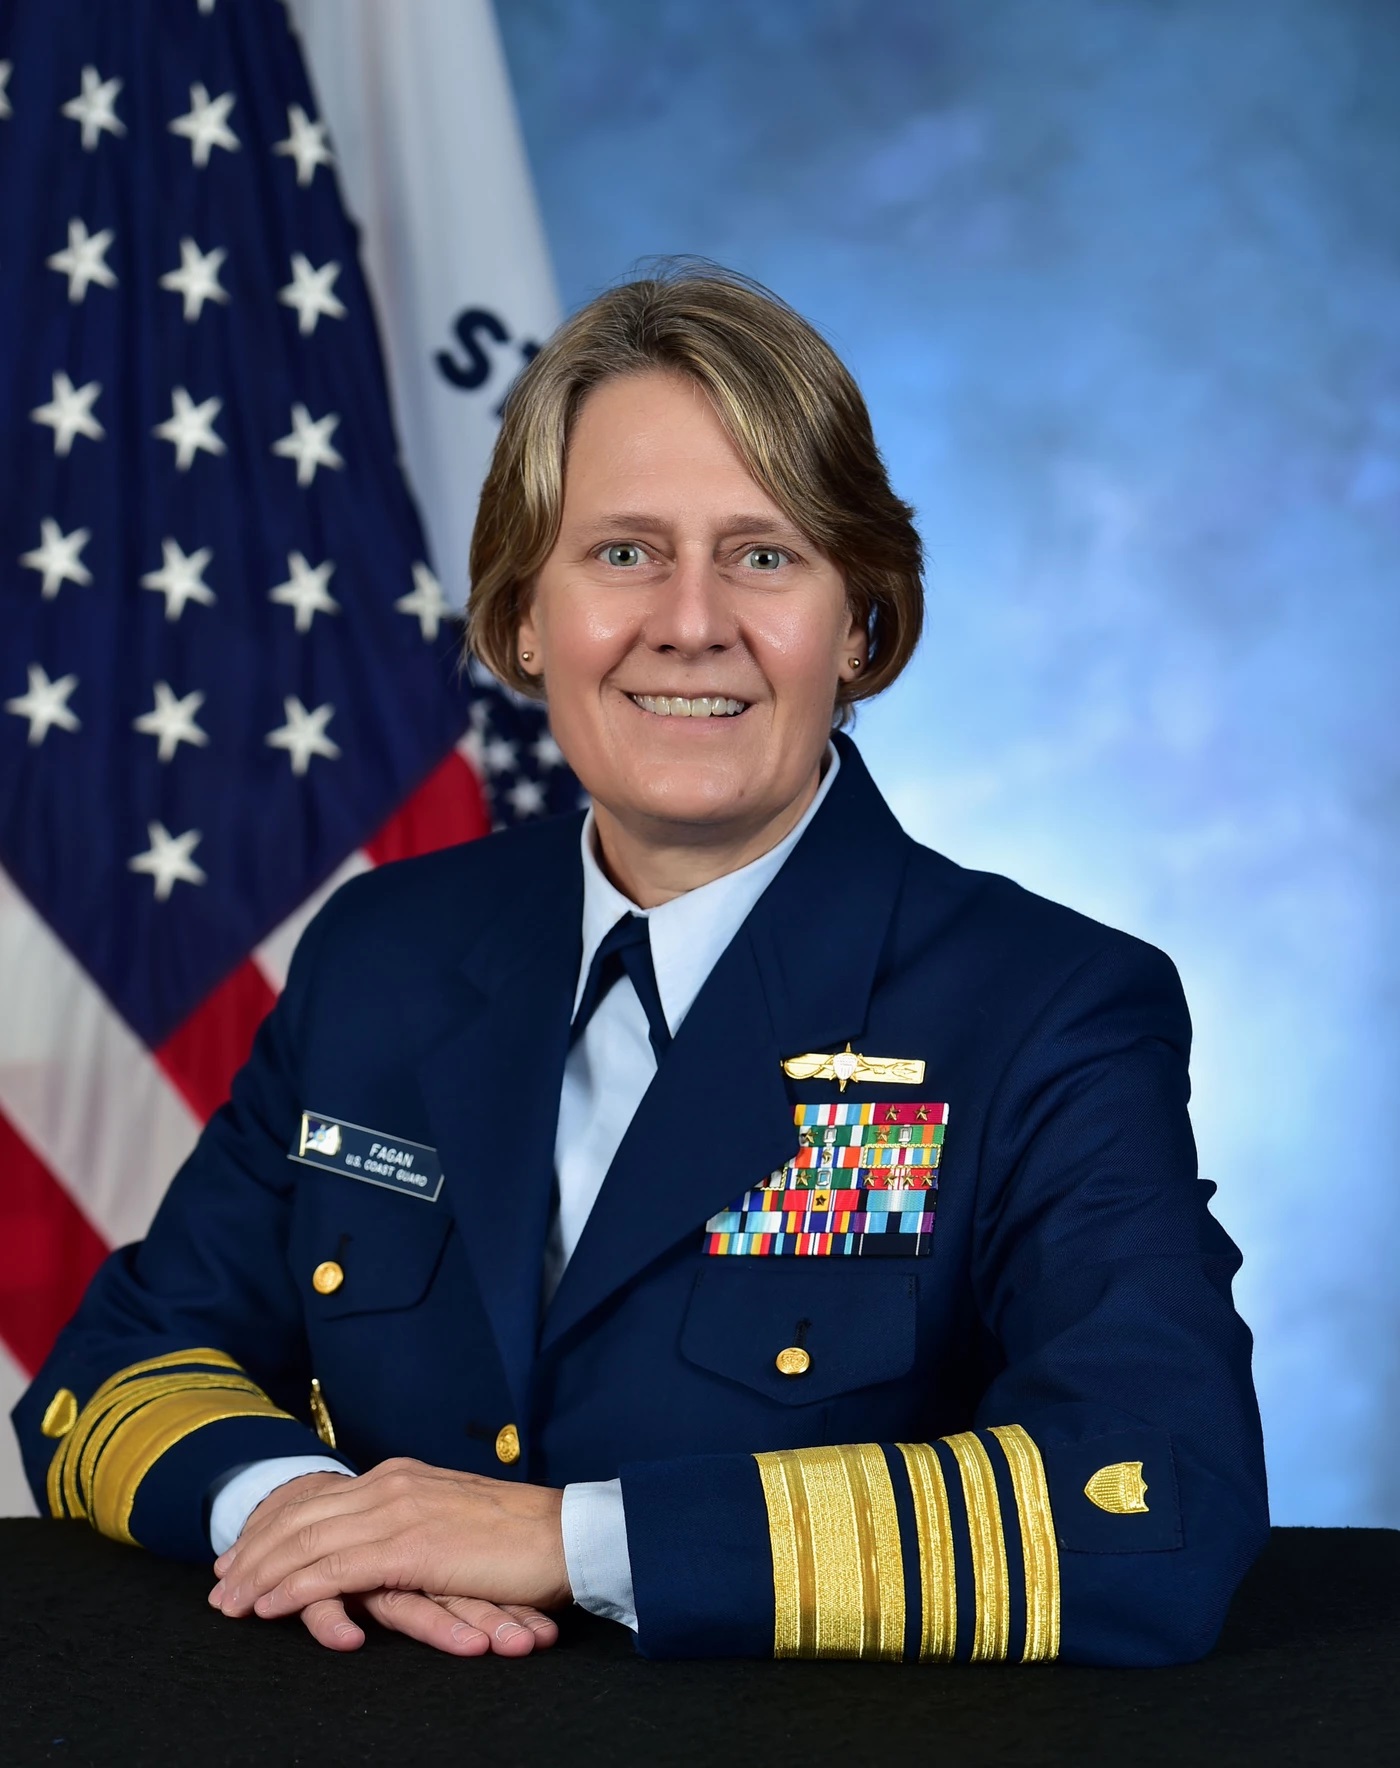 Admiral Linda Fagan has been nominated to serve as the next commandant of the U.S. Coast Guard. If confirmed, she would be the first woman to lead a branch of the U.S. military.